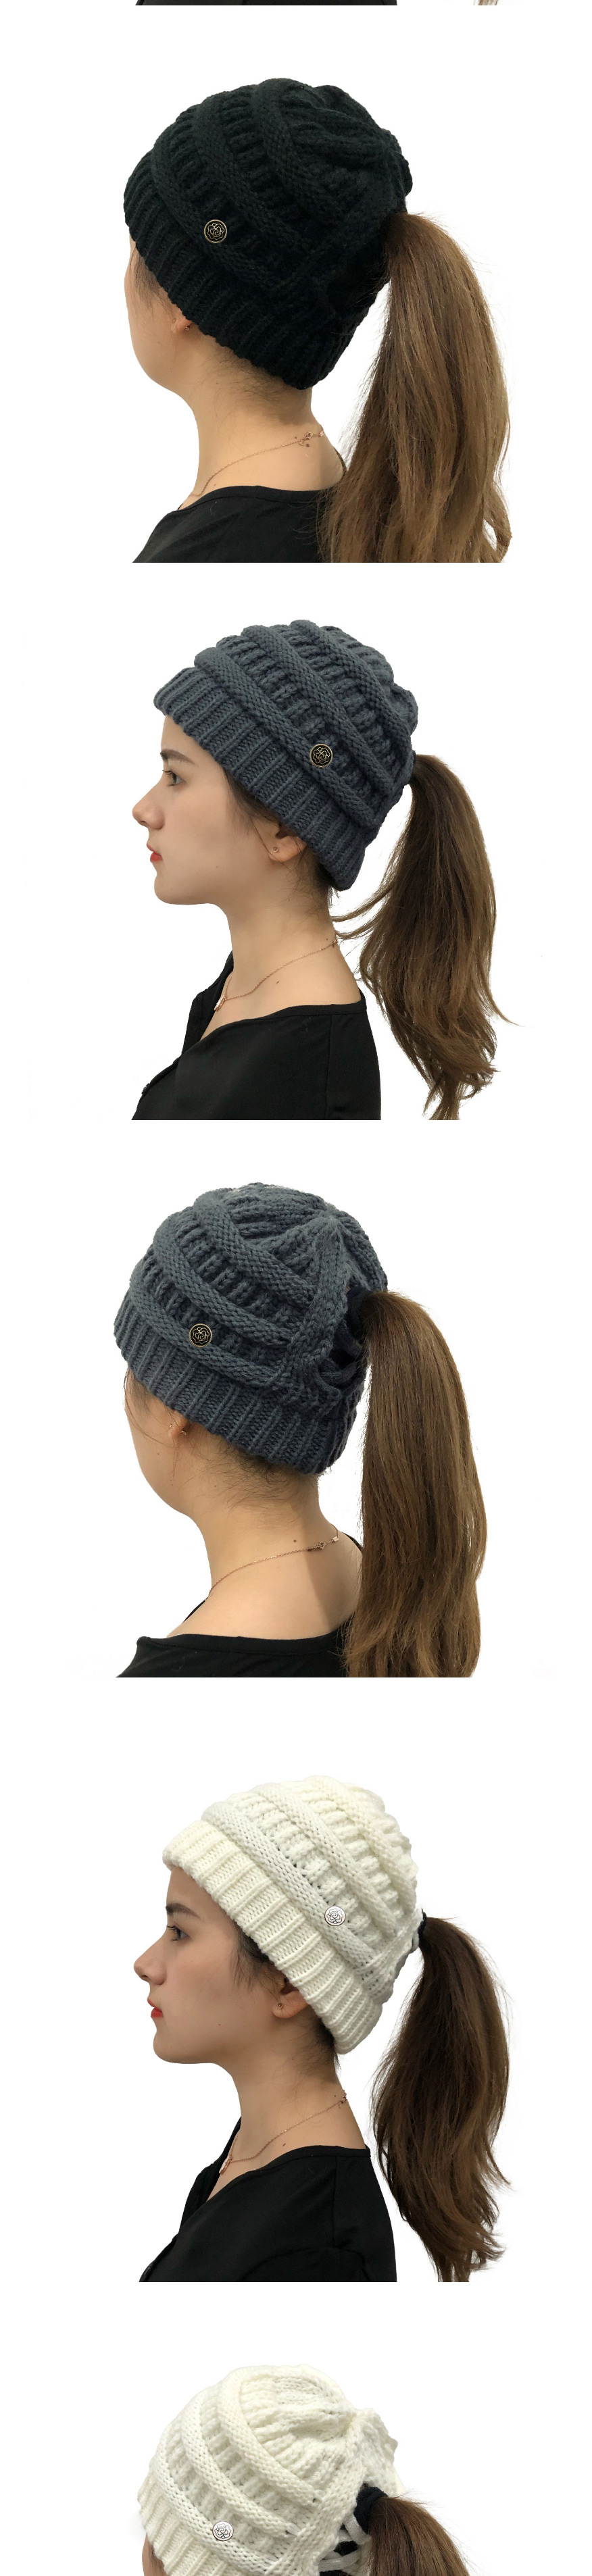 Fashion Gray Button Detachable Cross-back Ponytail Knitted Hat,Knitting Wool Hats